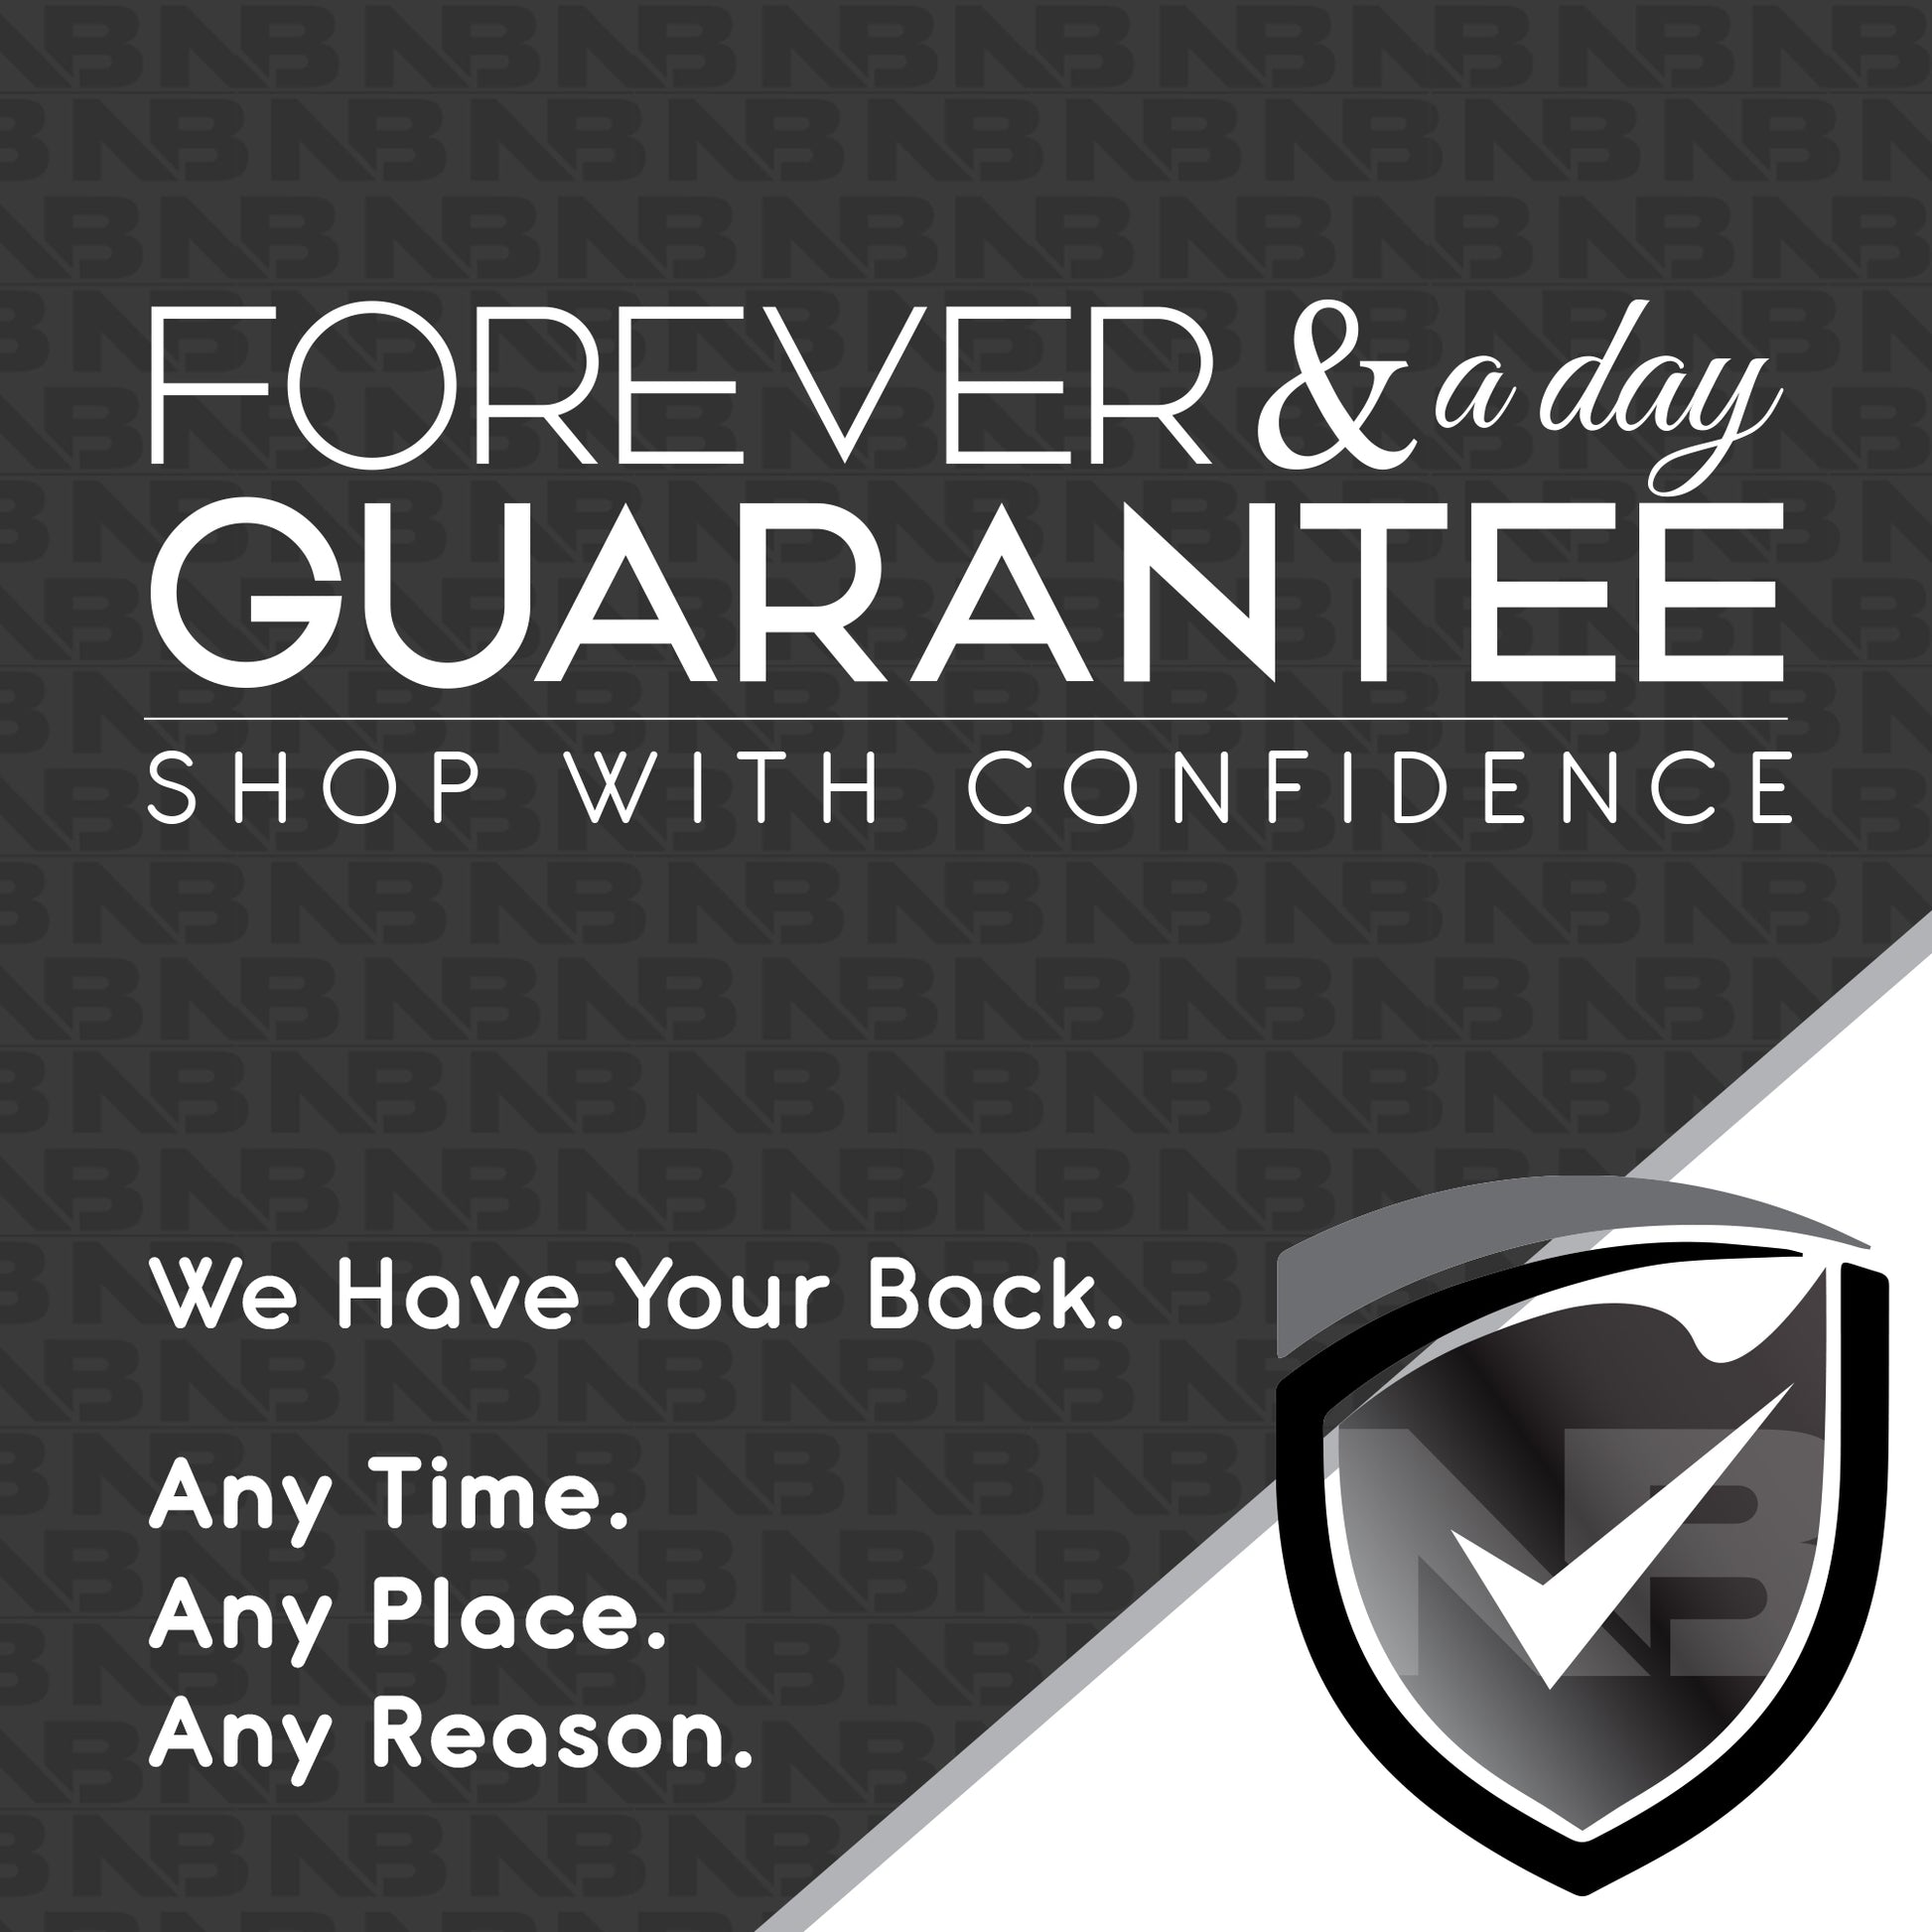 Daily Deals and Discounts from FOREVER®